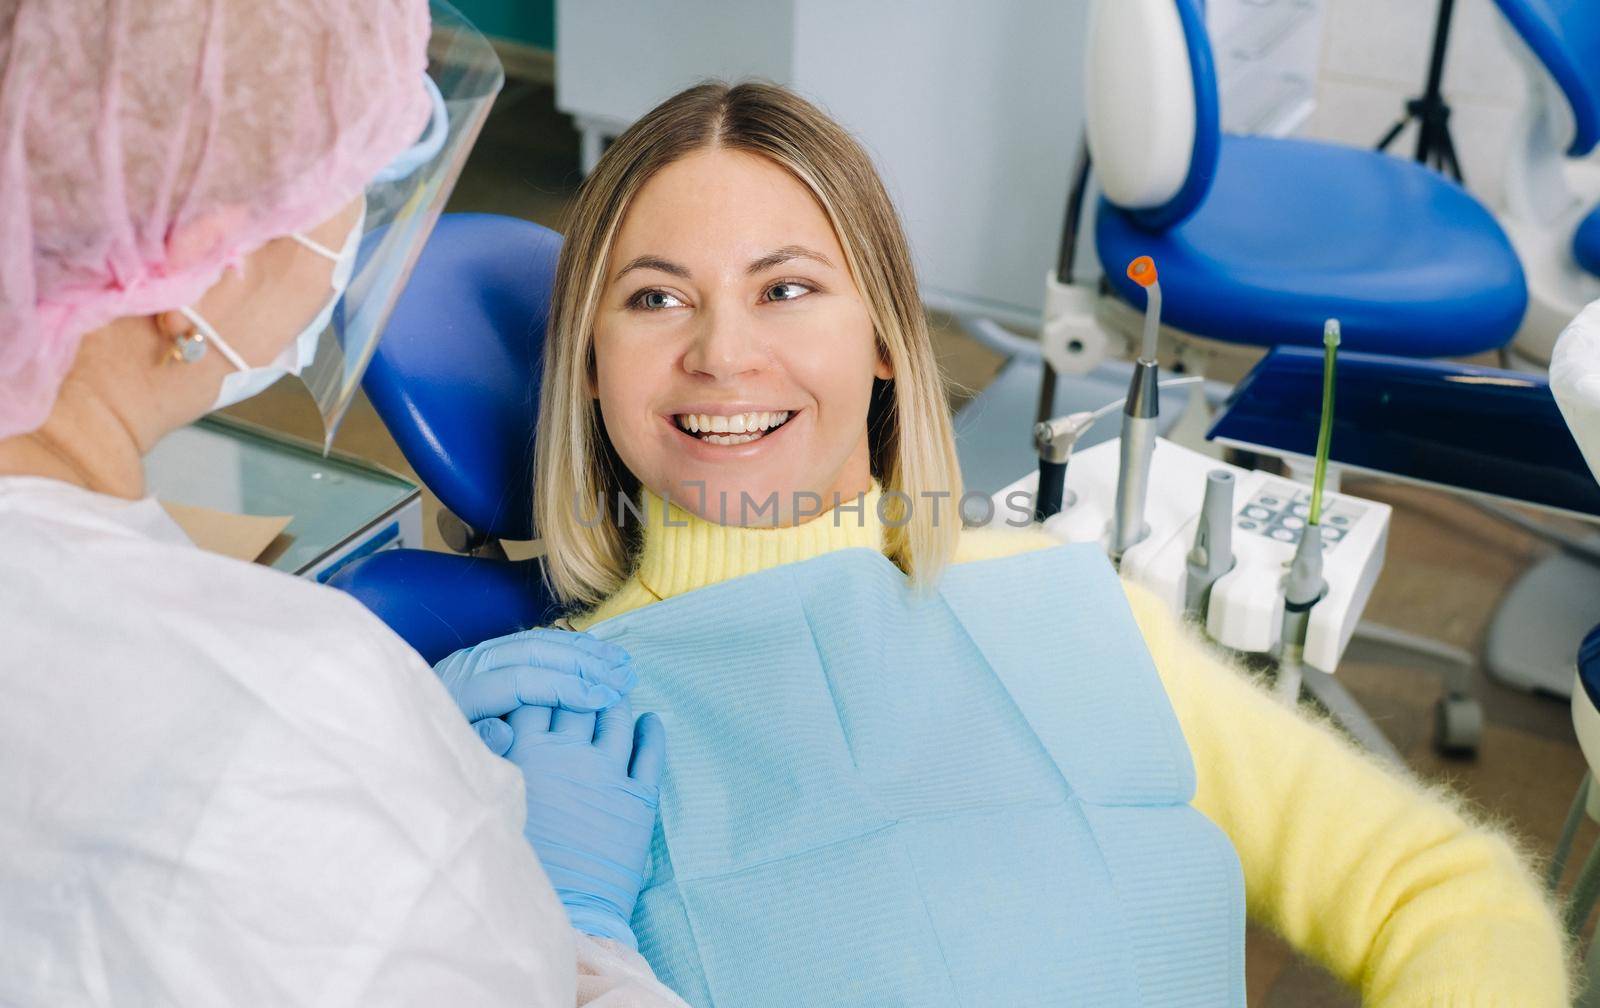 The girl smiles at the dentist and looks at her by Lobachad